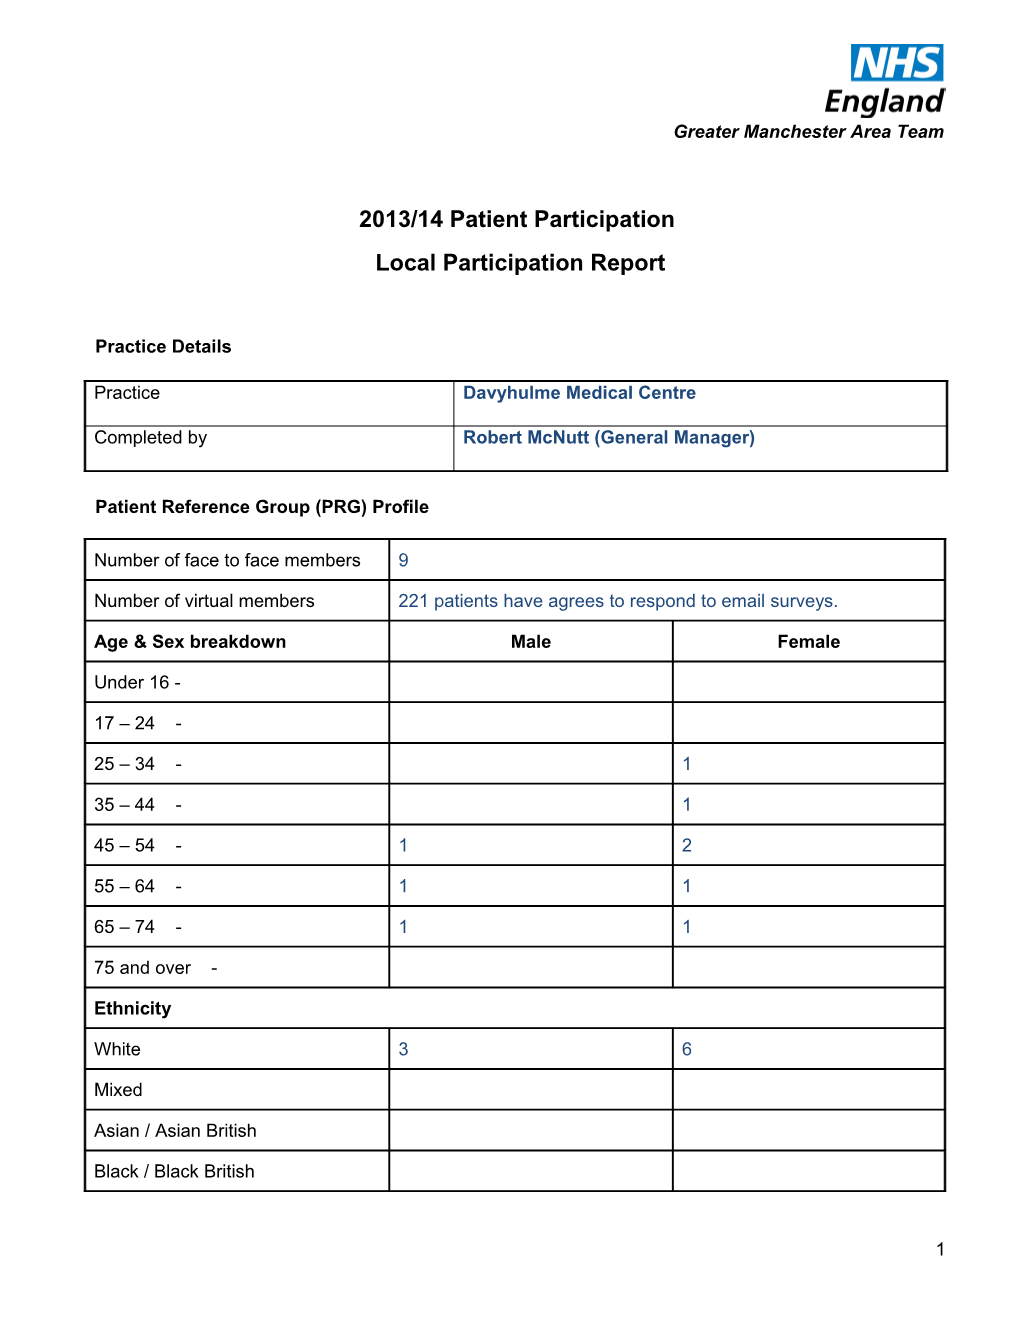 Template for Information to Be Included in Local Patient Participation Report